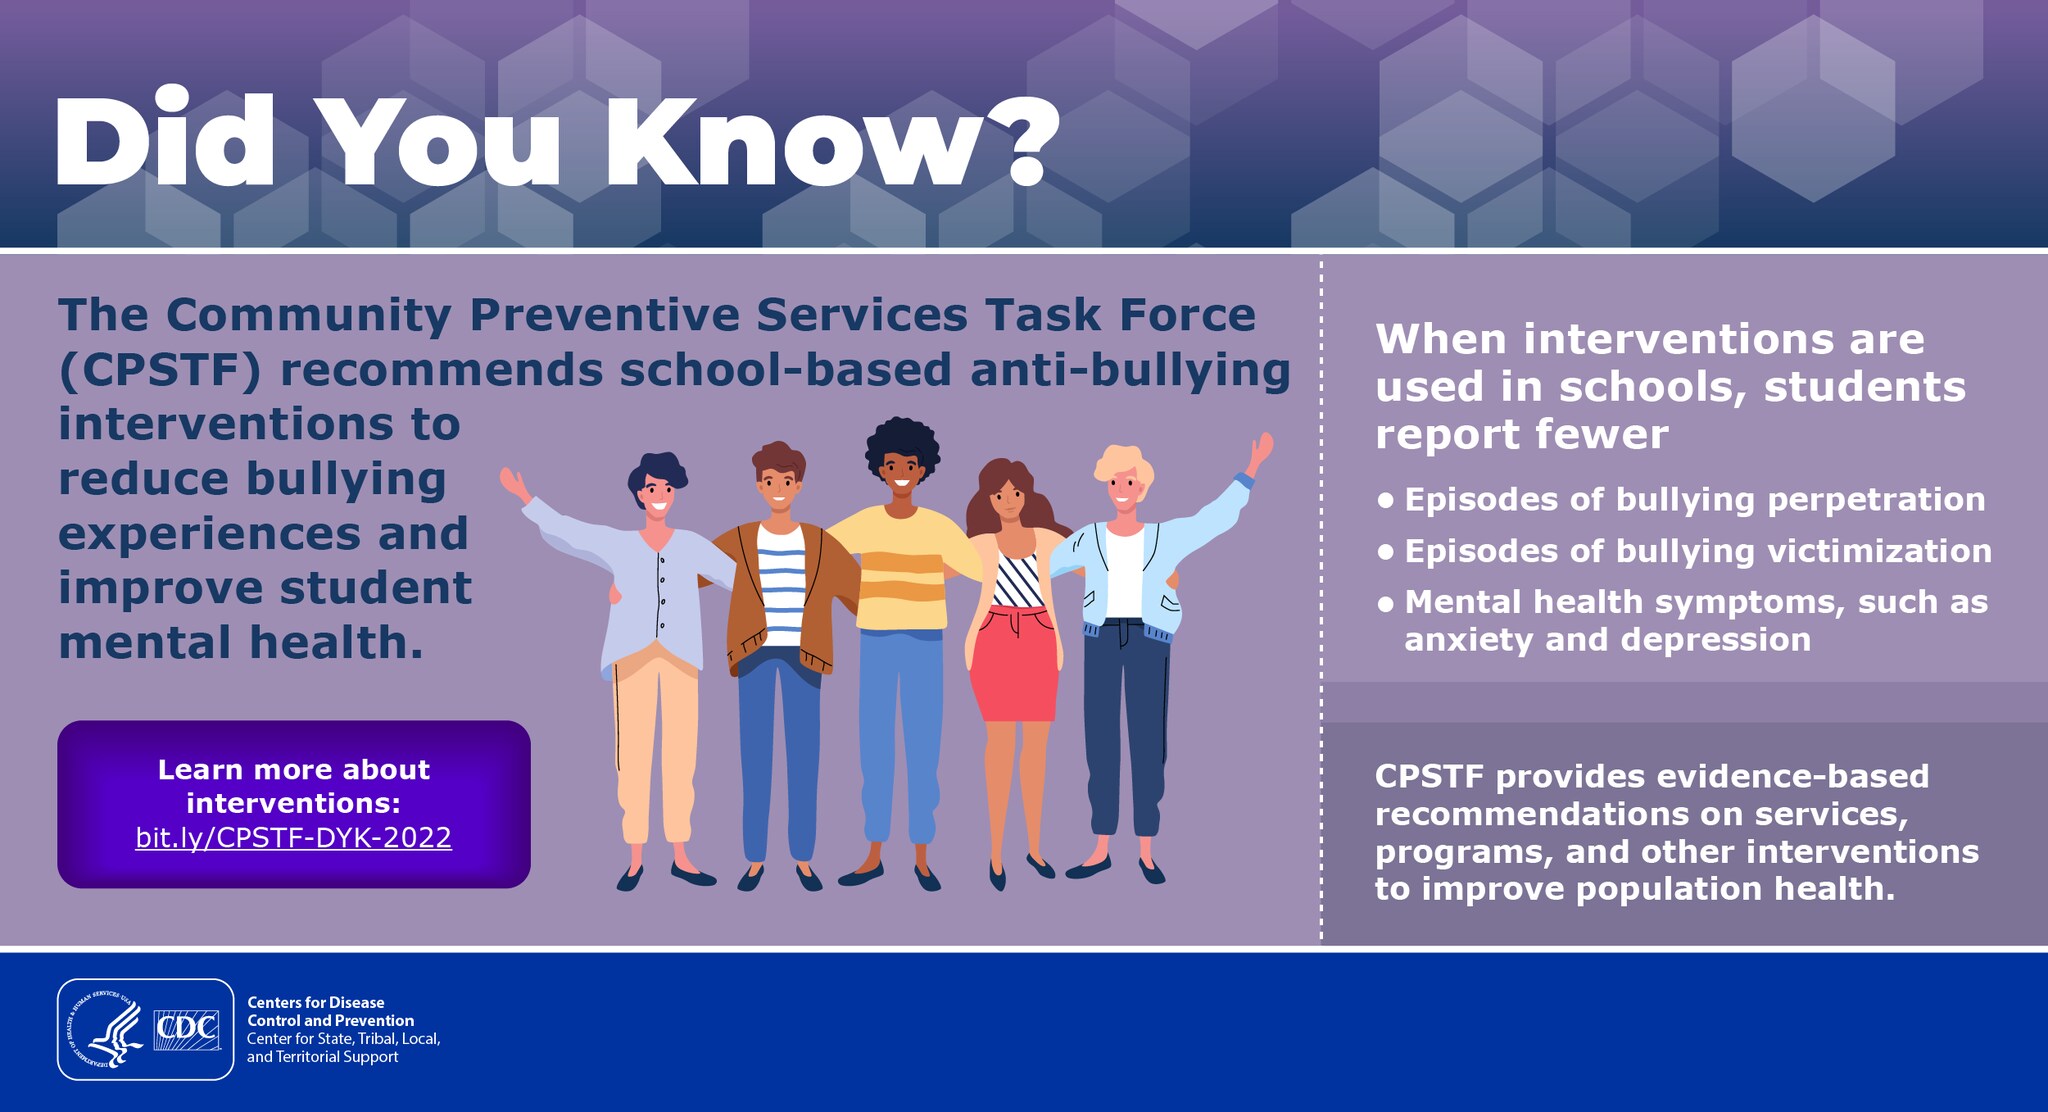 An infographic titled Did You Know? Text says: The Community Preventive Services Task Force (CPSTF) recommends school-based anti-bullying interventions to reduce bullying experiences and improve student mental health. When interventions are implemented in schools, students report fewer episodes of bullying perpetration, bullying victimization, and mental health symptoms such as anxiety and depression. Learn more about interventions: bit.ly/DYK-CPSTF-2022. CPSTF provides evidence-based recommendations on services, programs, and other interventions to improve population health.